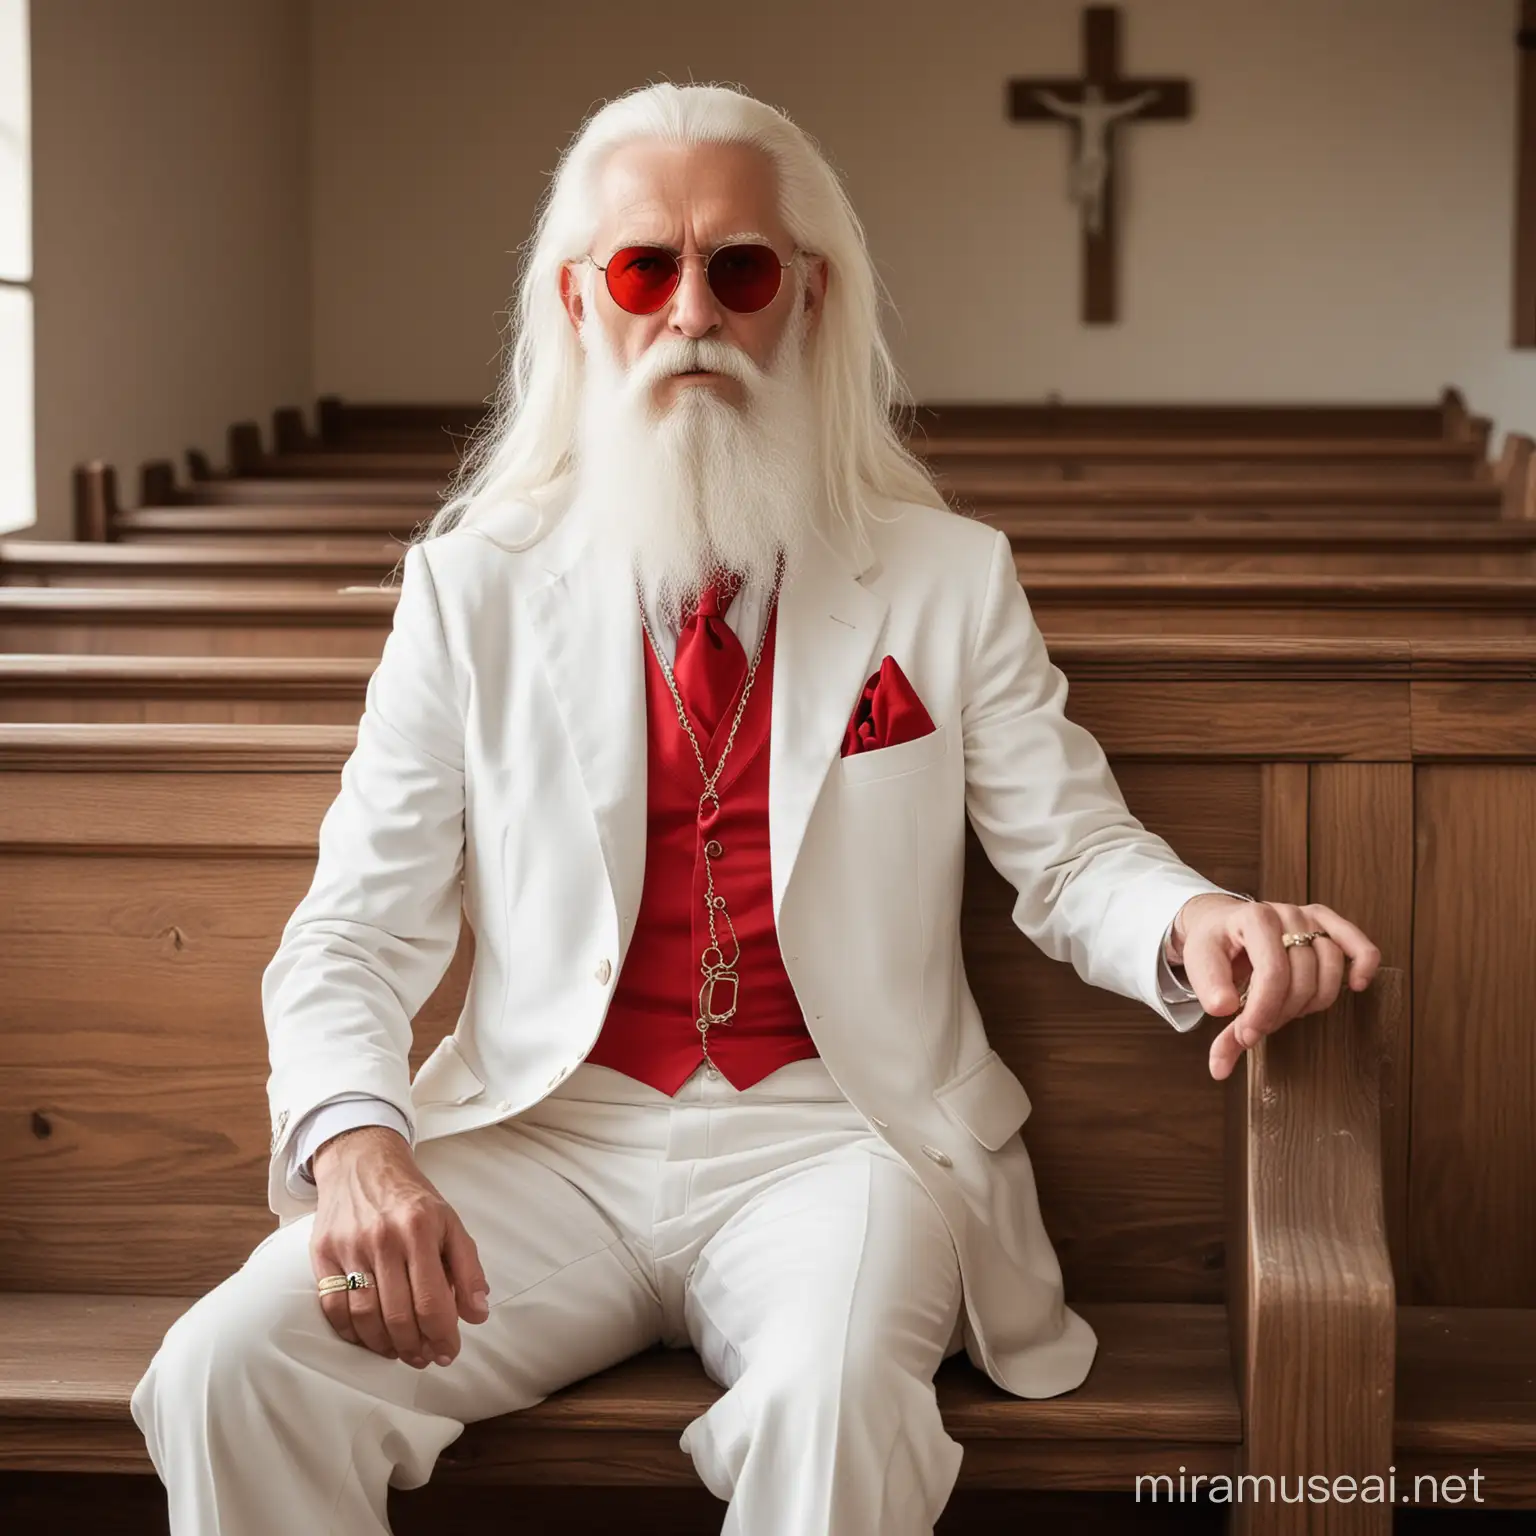 Inebriated White Con Man in Church Pew